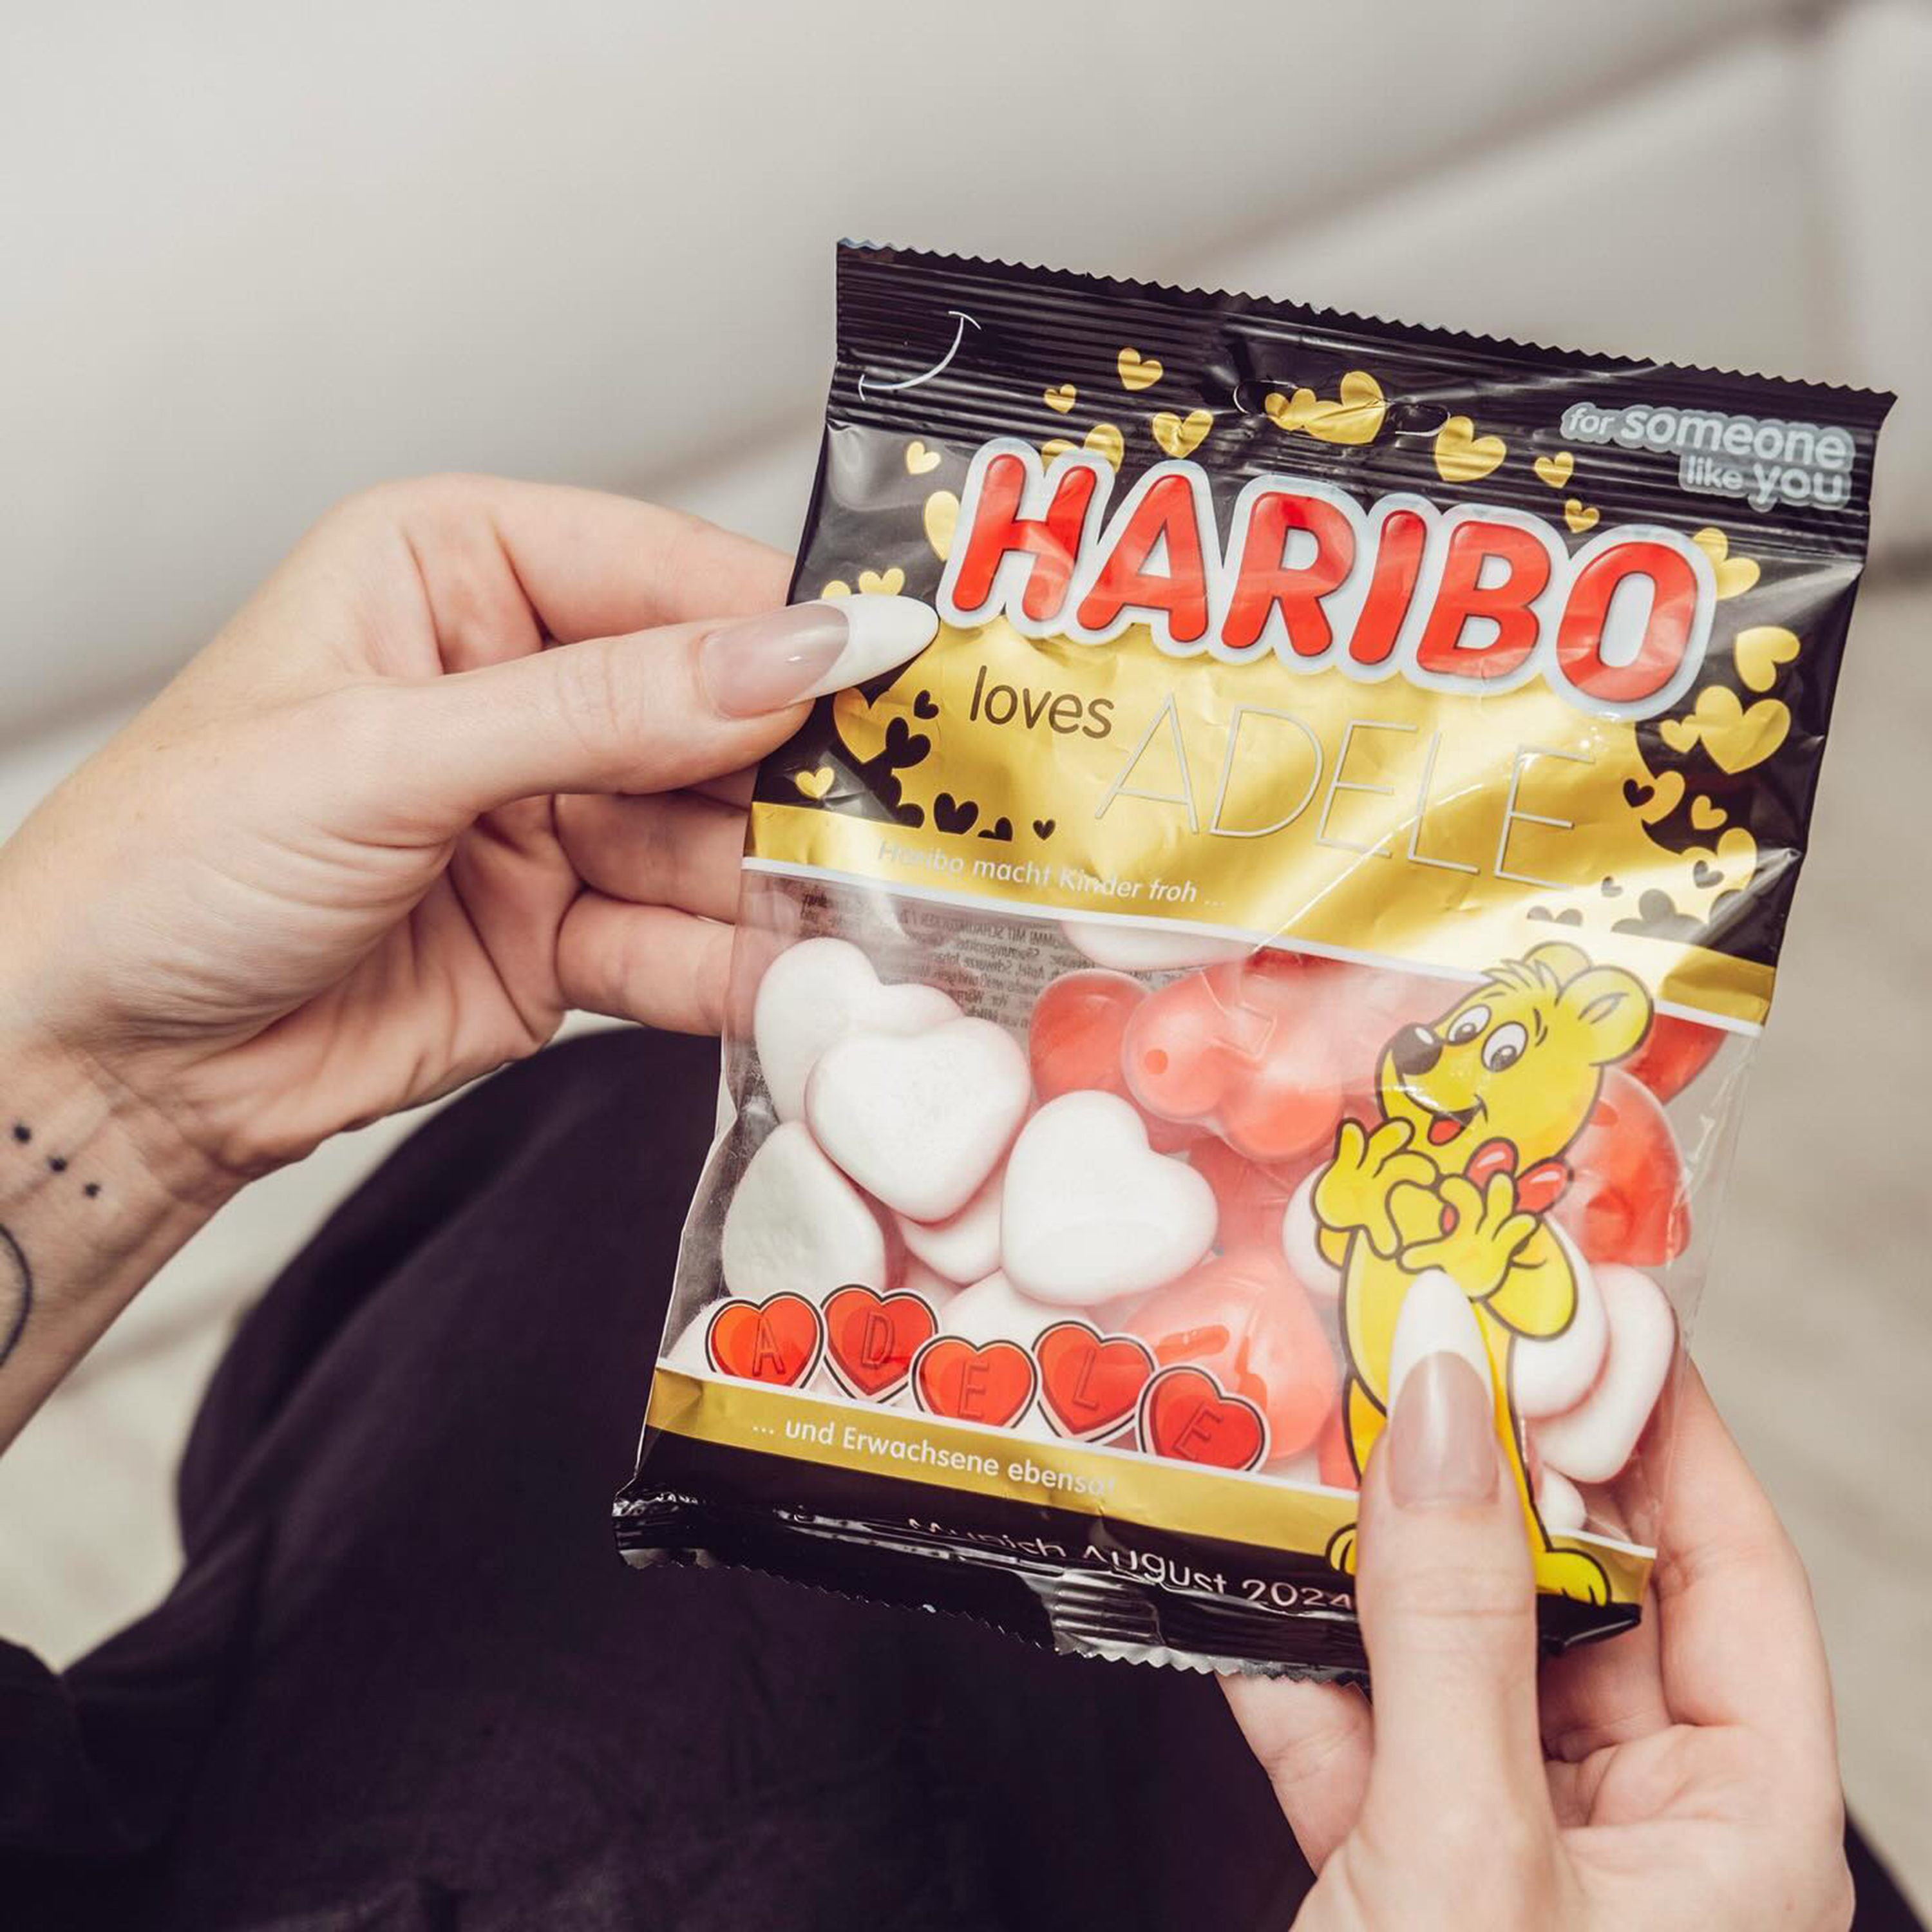 Haribo created special treats in honour of the singer for guests to snap up